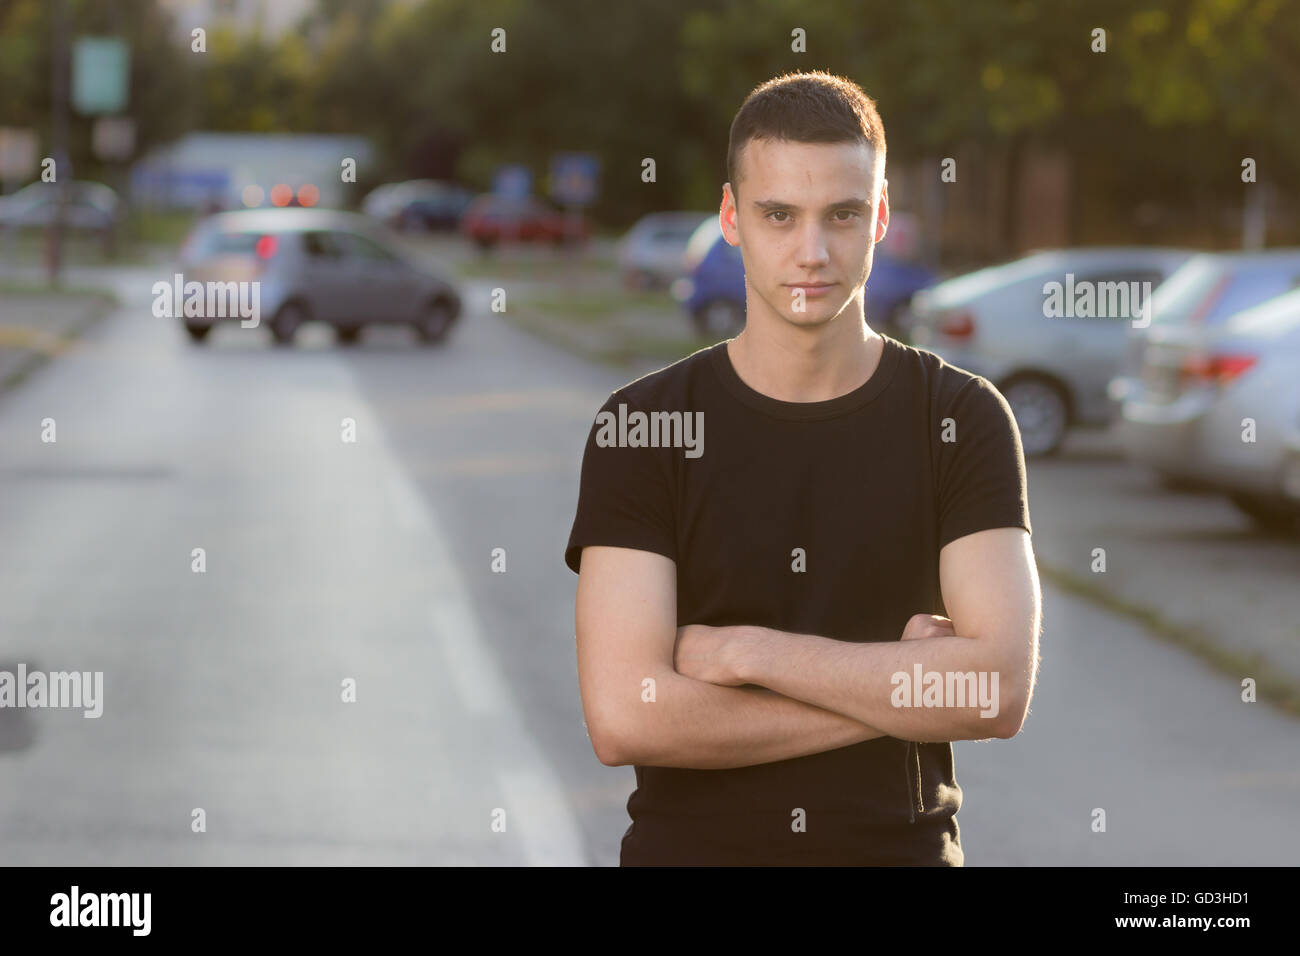 Young man in 20s serious expression, arms crossed. Background out of focus. Stock Photo